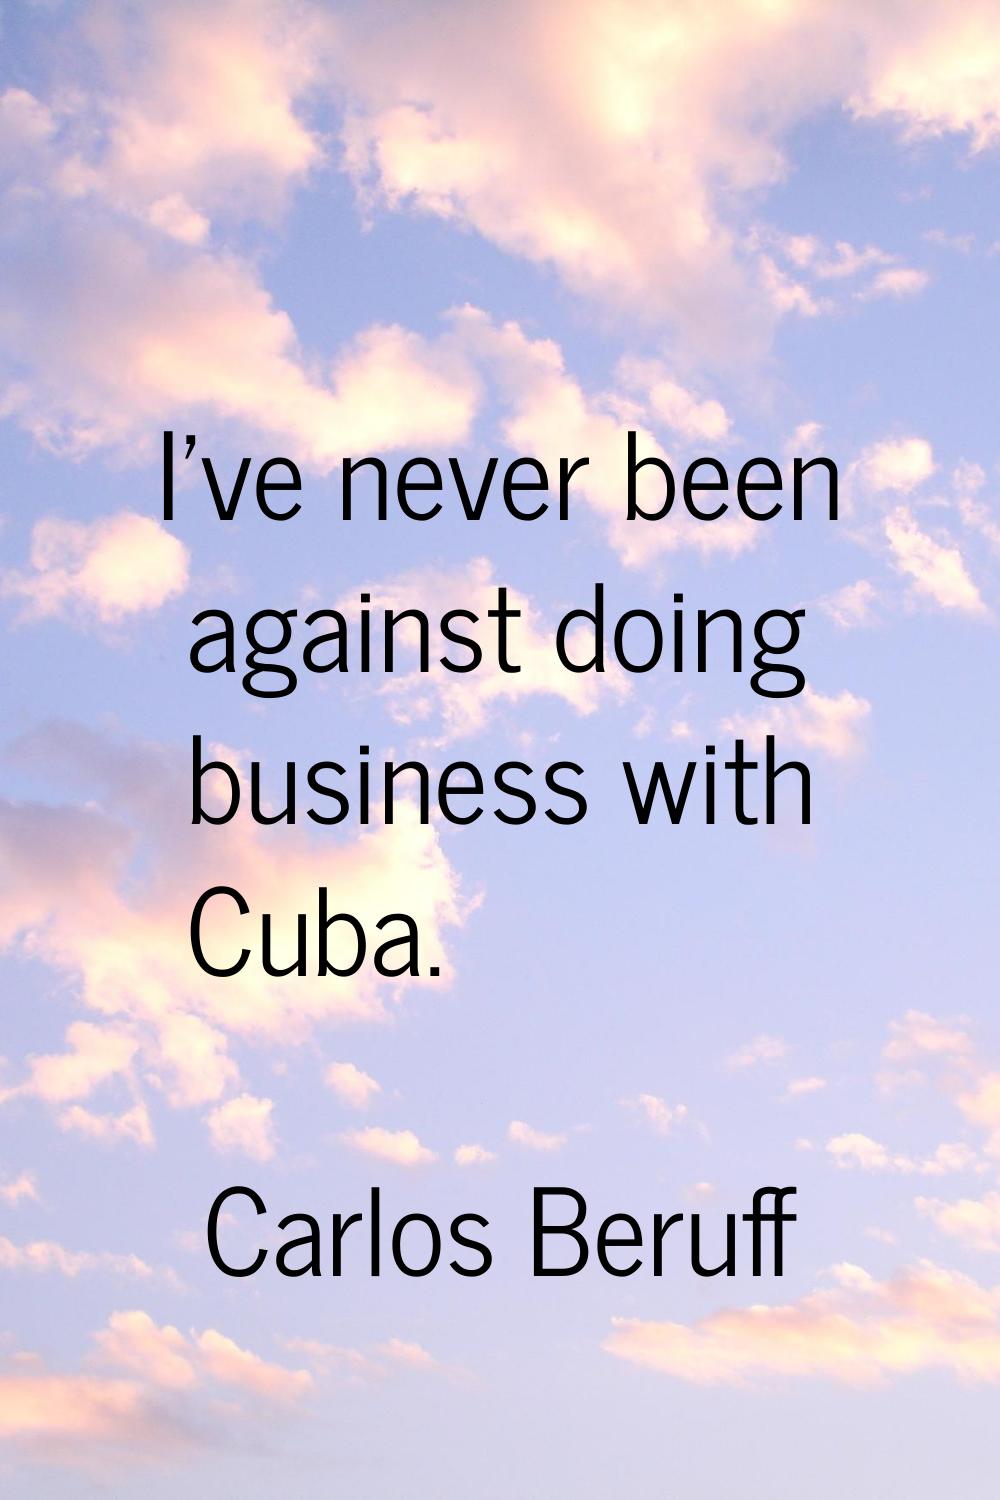 I've never been against doing business with Cuba.